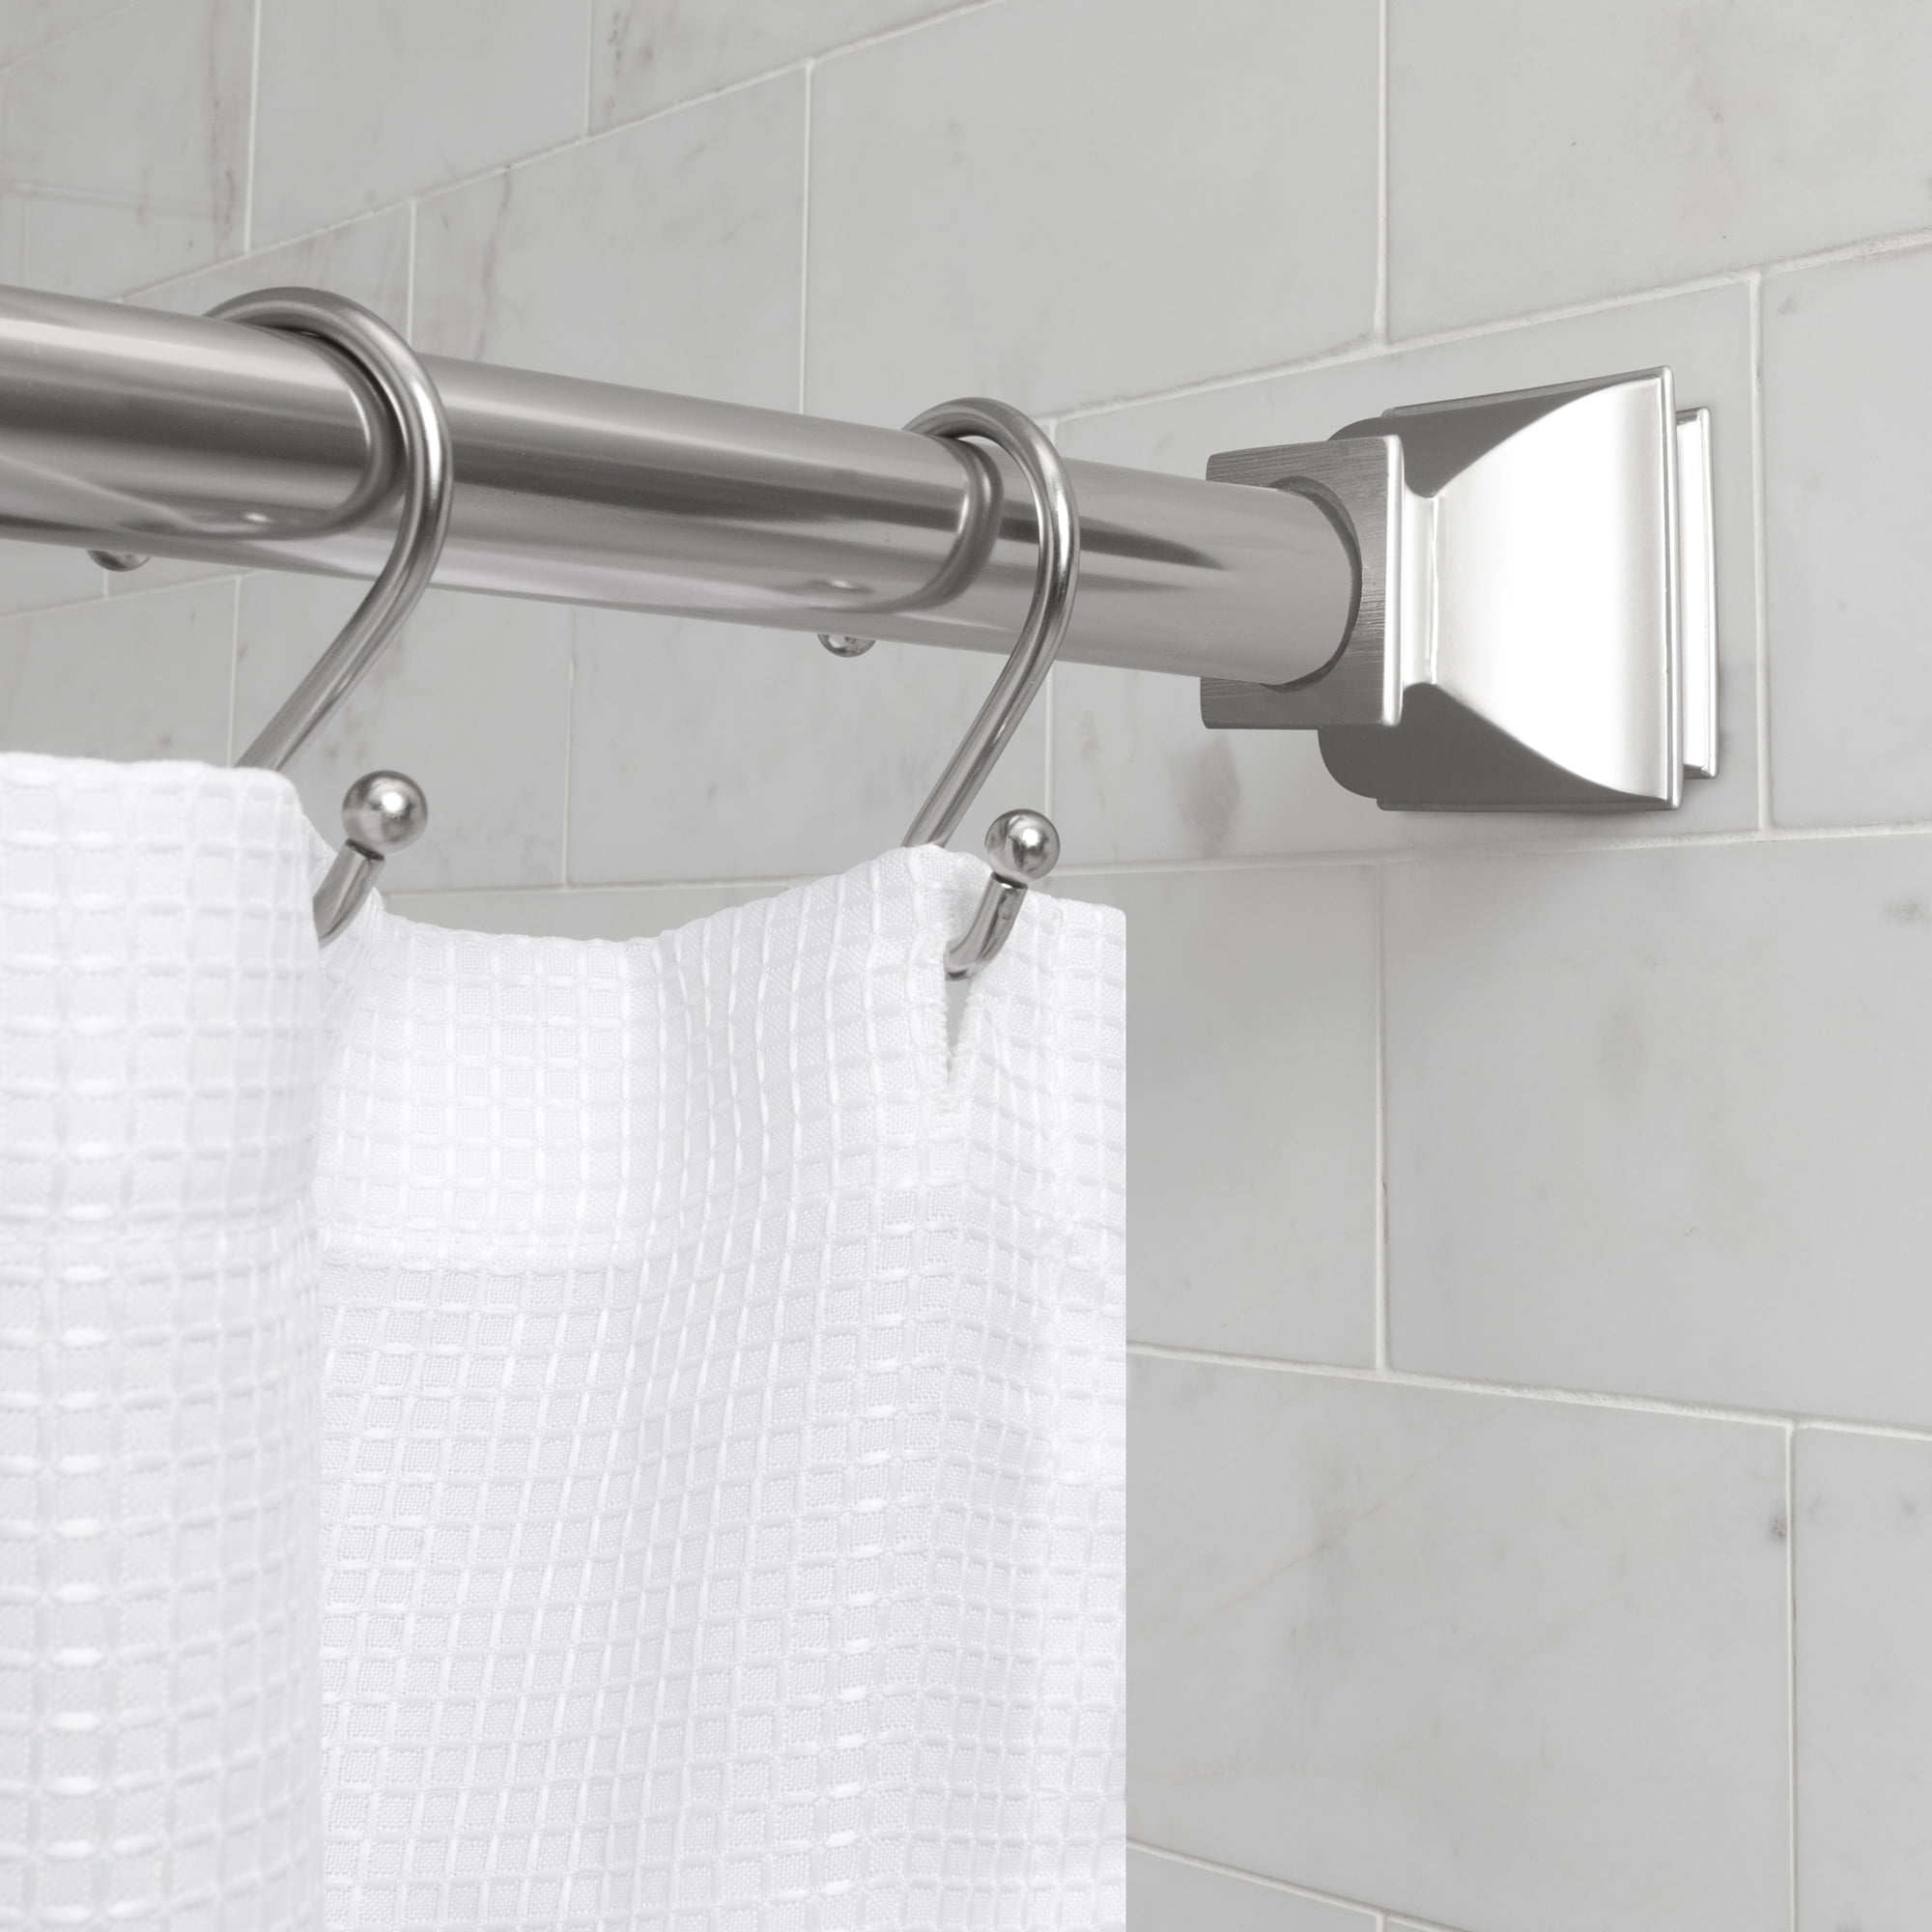 Aluminum Square Shower Tension Rod 43, Oil Rubbed Bronze Shower Curtain Rod Adjustable